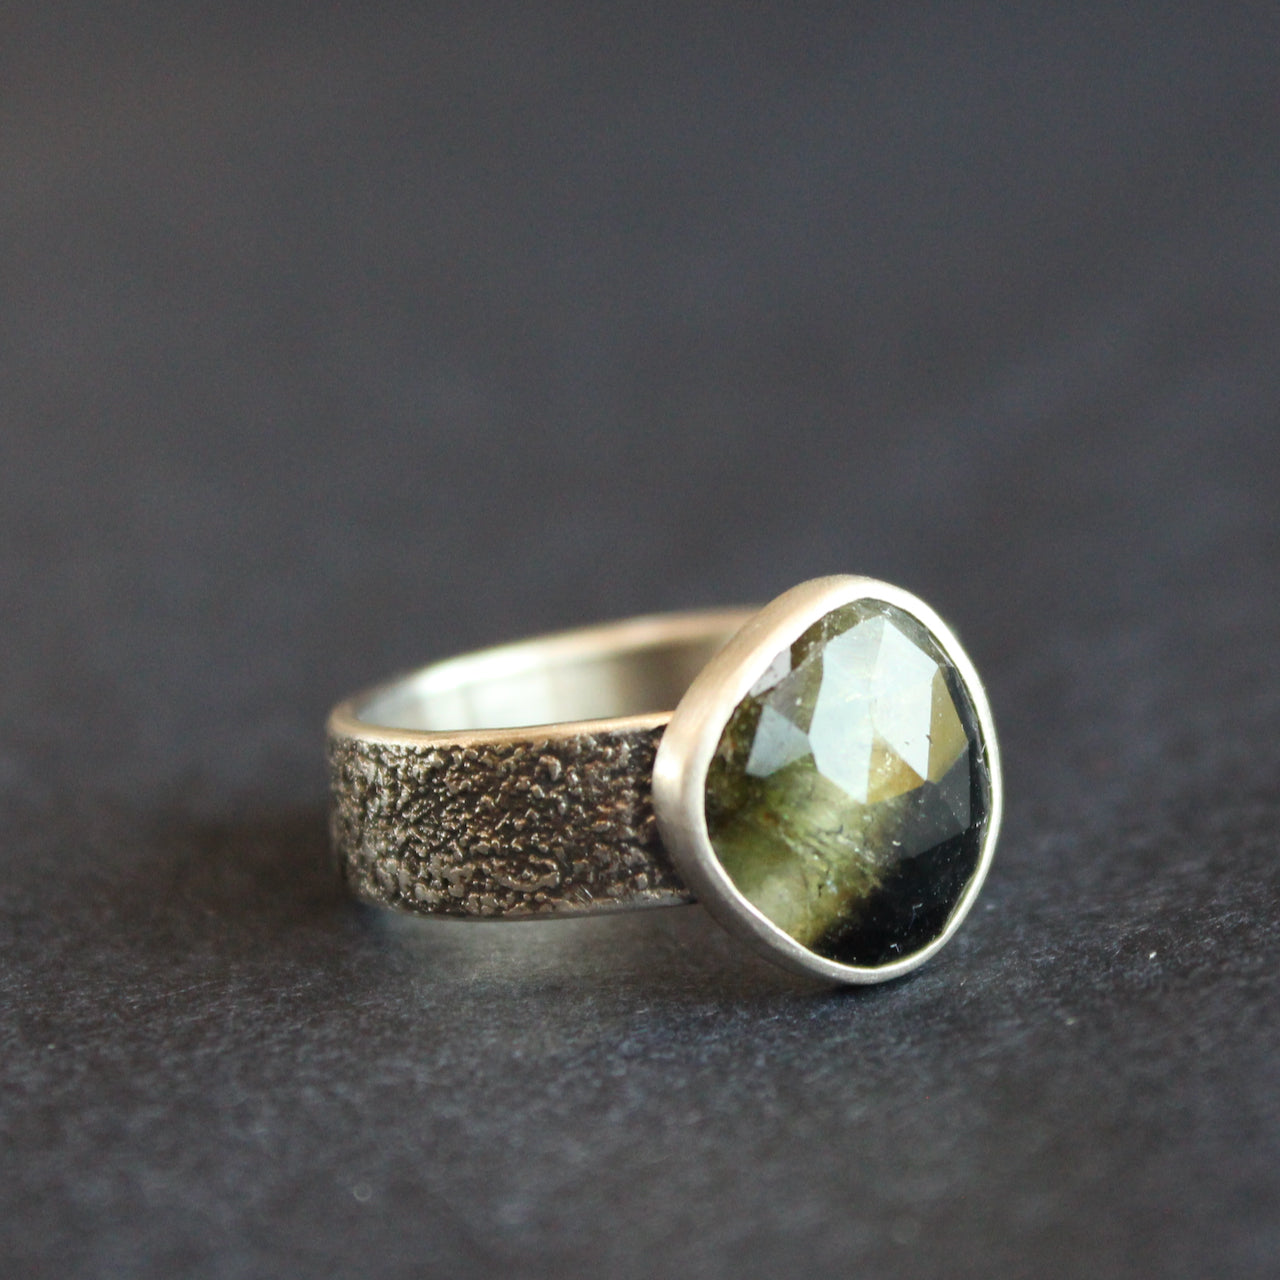 textured silver ring with a dark green stone by UK jeweller Carin Lindberg 